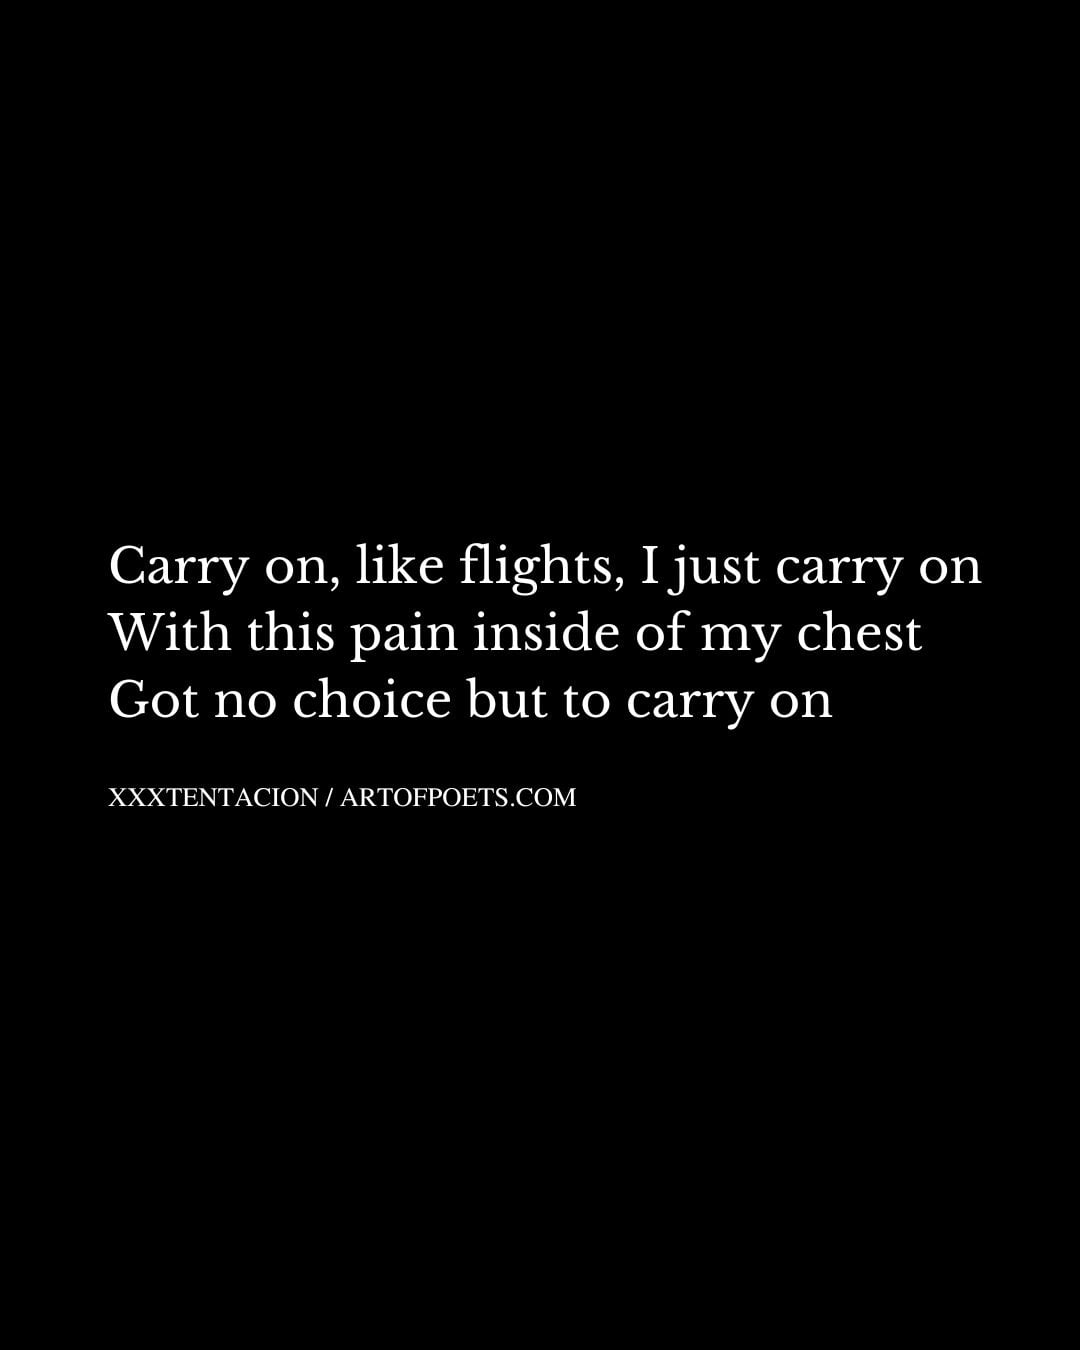 Carry on like flights I just carry on With this pain inside of my chest Got no choice but to carry on 1